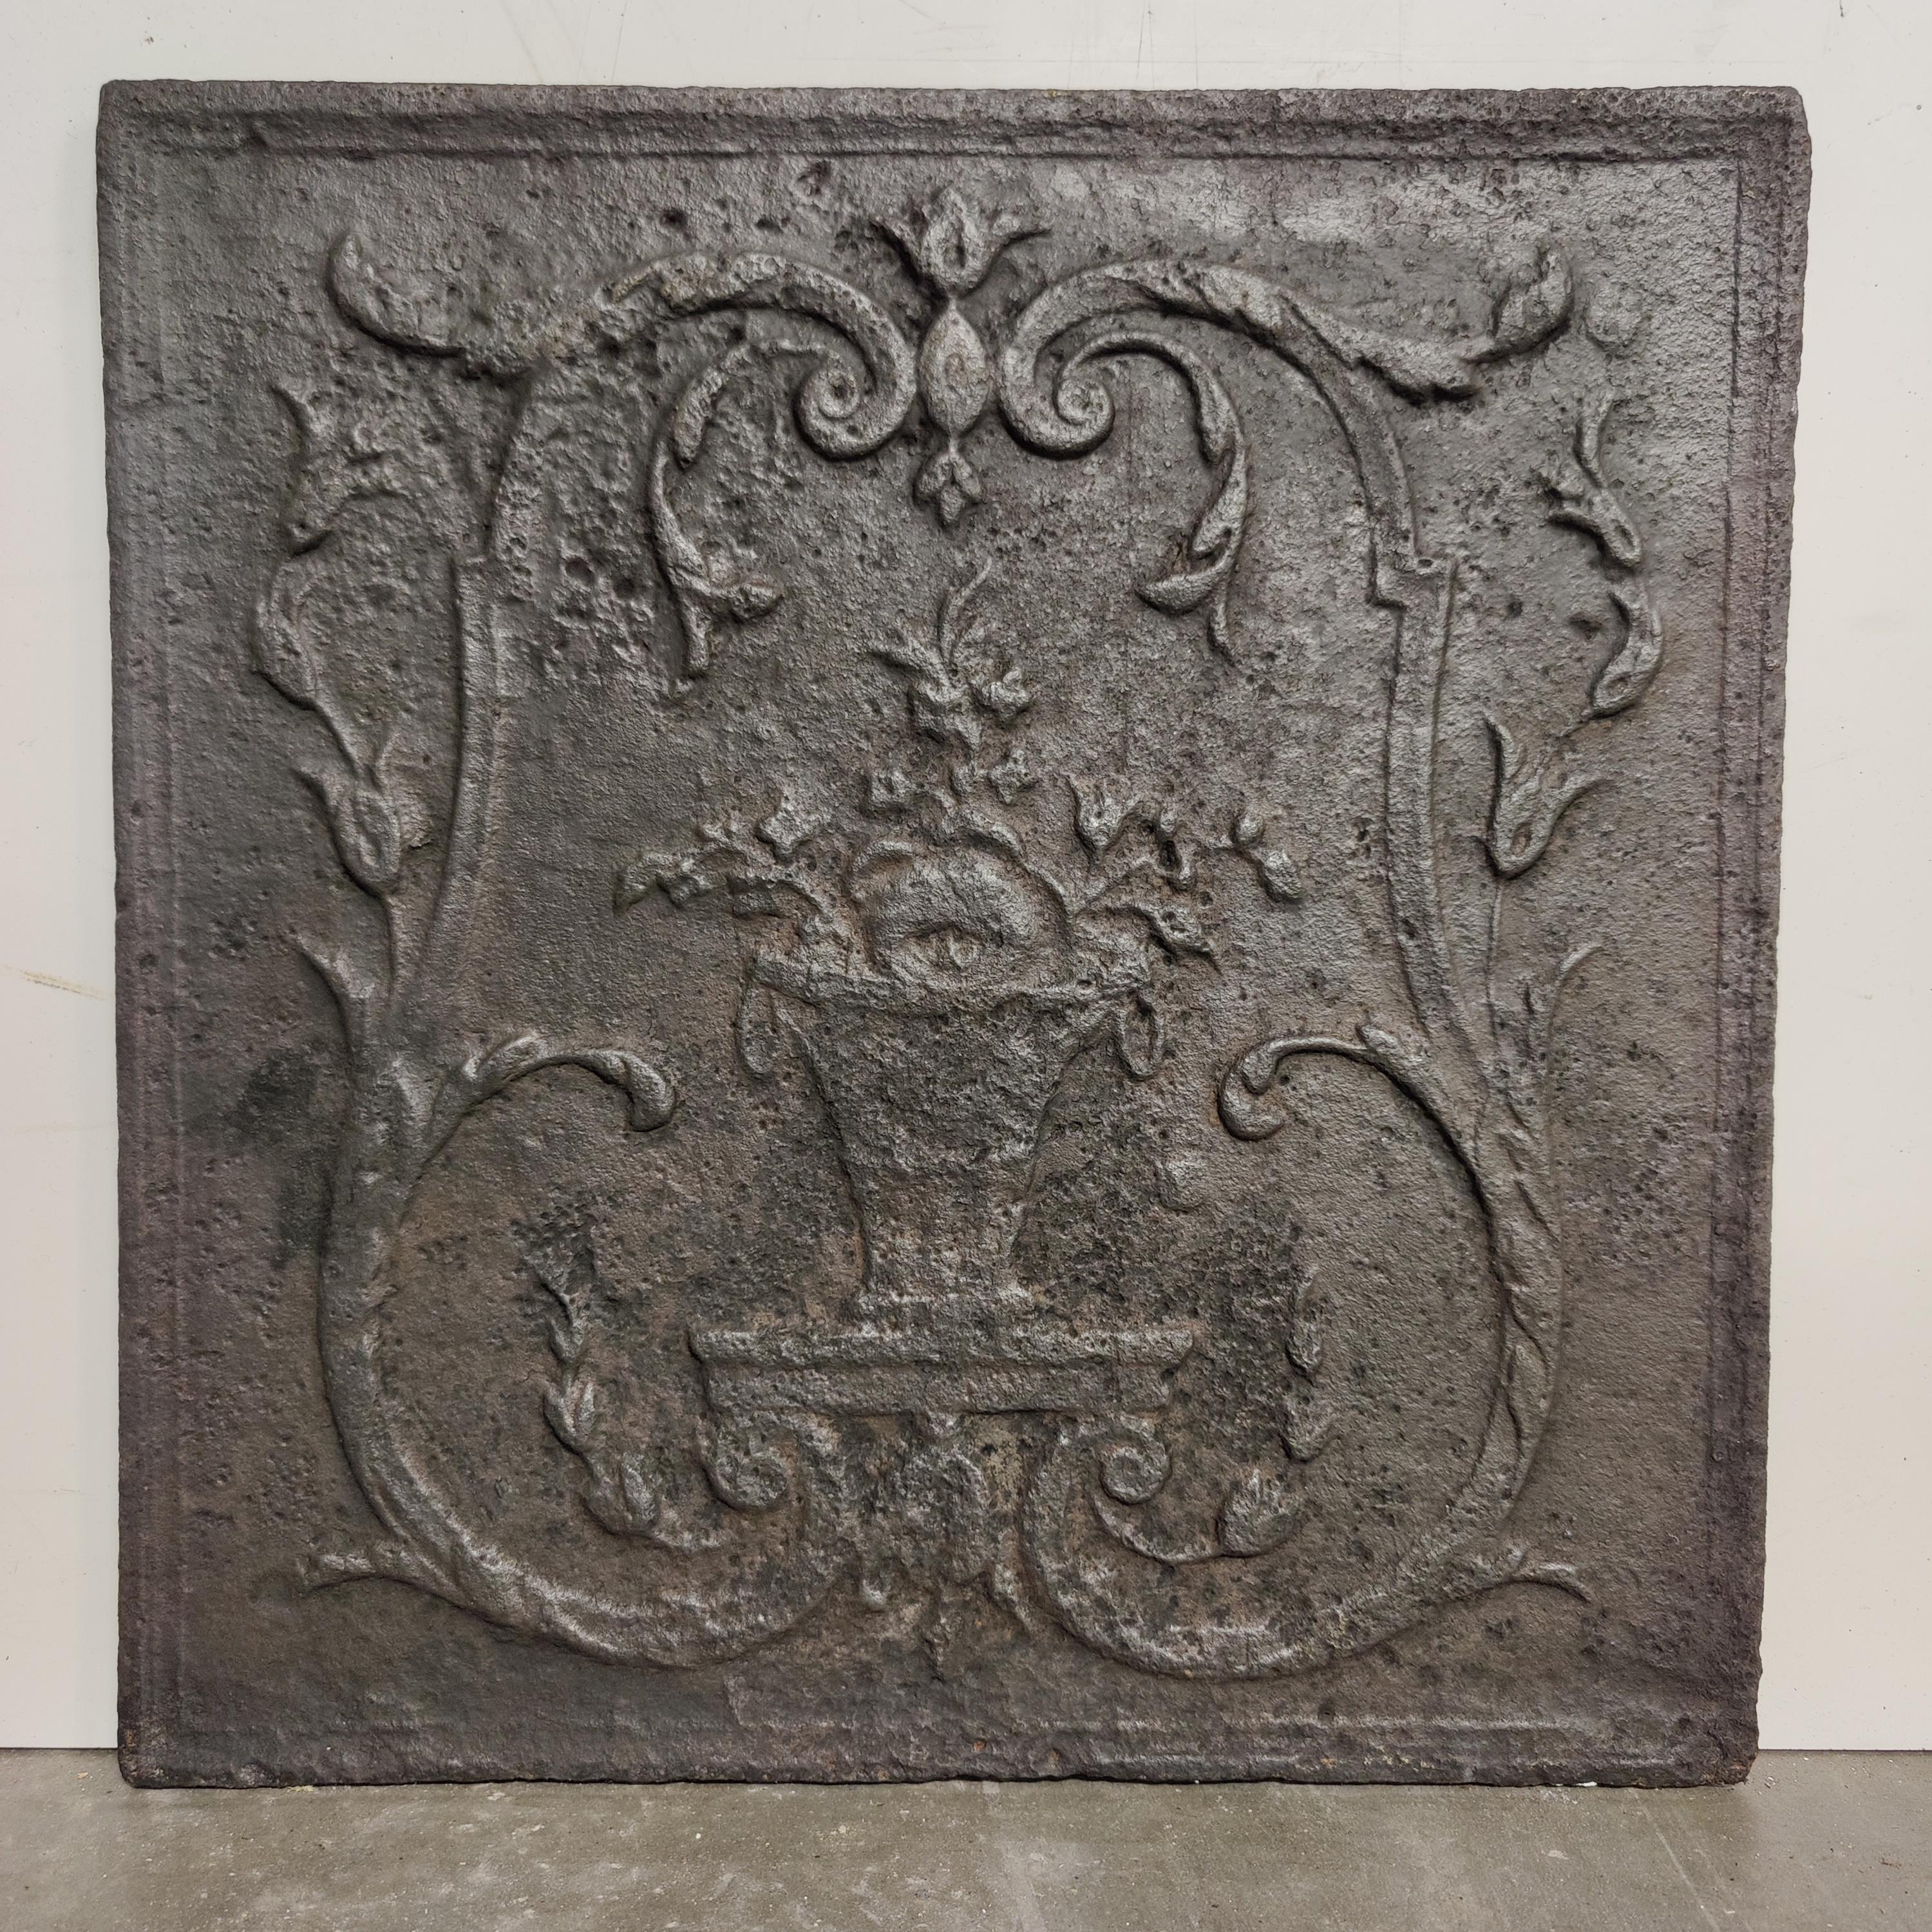 Antique fireback / backsplash, vase with flowers.

Nice square cast iron antique fireback displaying a vase with flowers.
Great condition, can be used in a real gas or log fire.
Very decorative piece.

29 lbs / 13 kg.

 
 